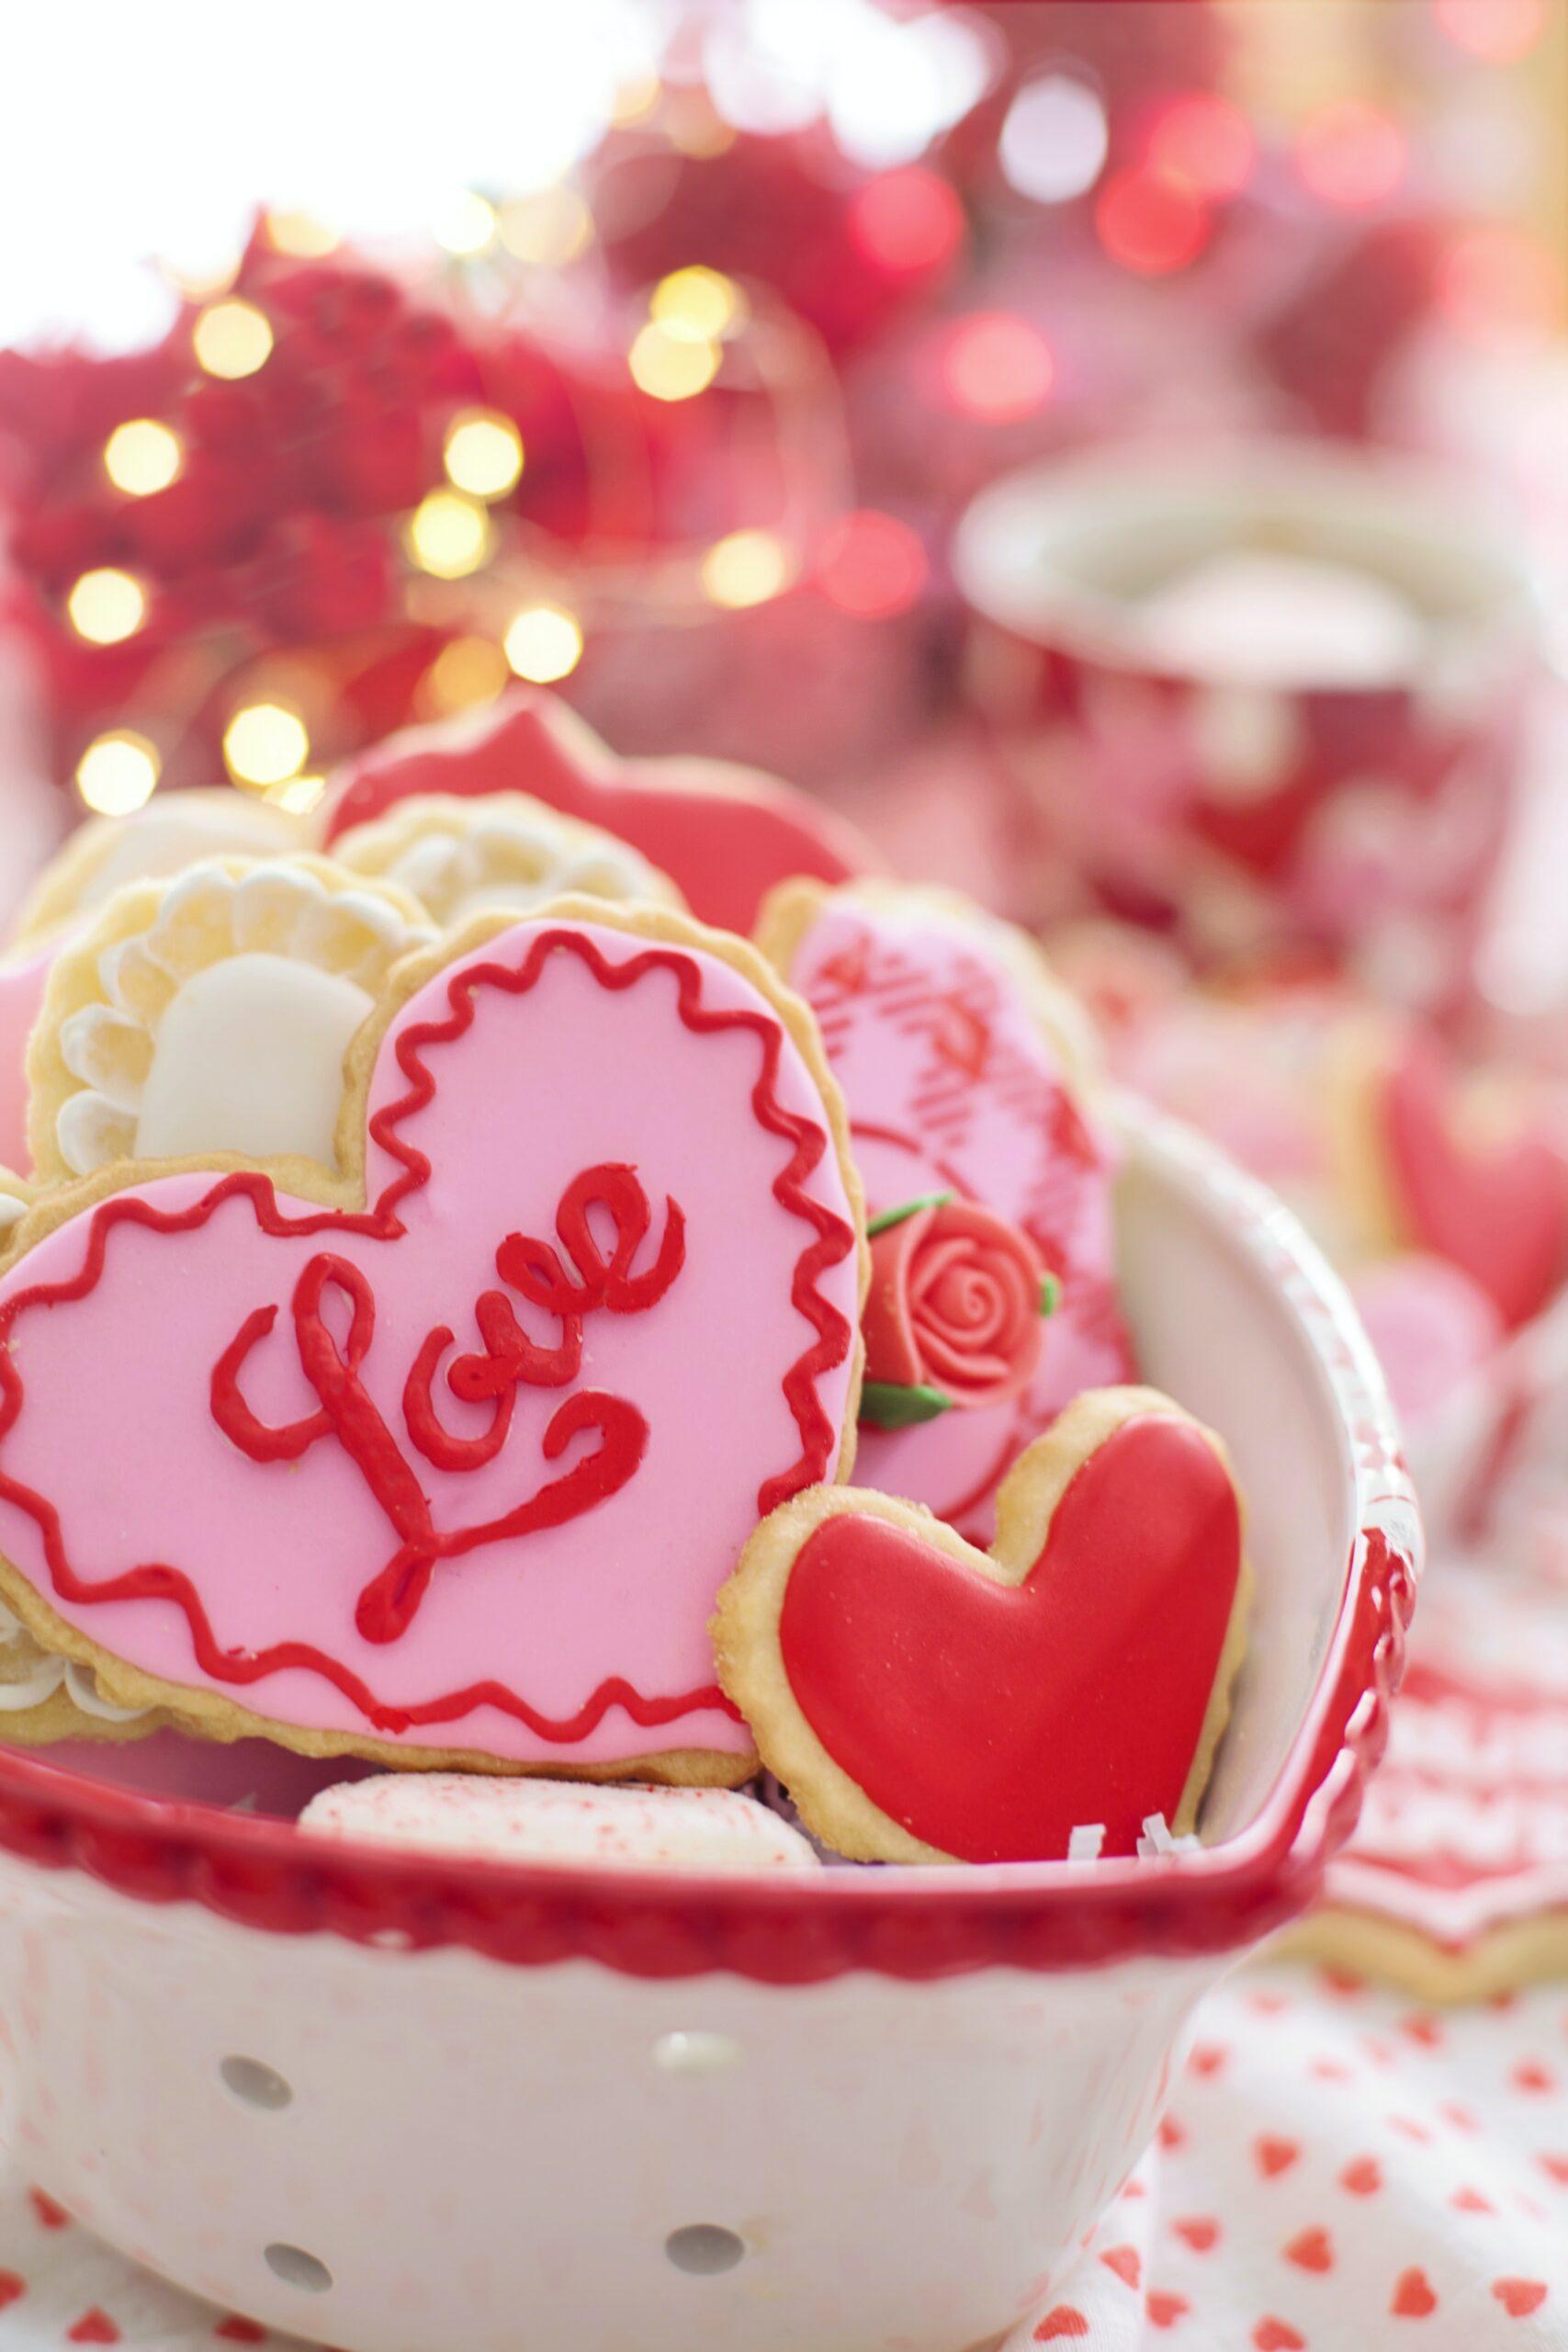 Valentine's heart cookies decorated with pink, red, and white. They are placed in a red and white heart shaped bowl.